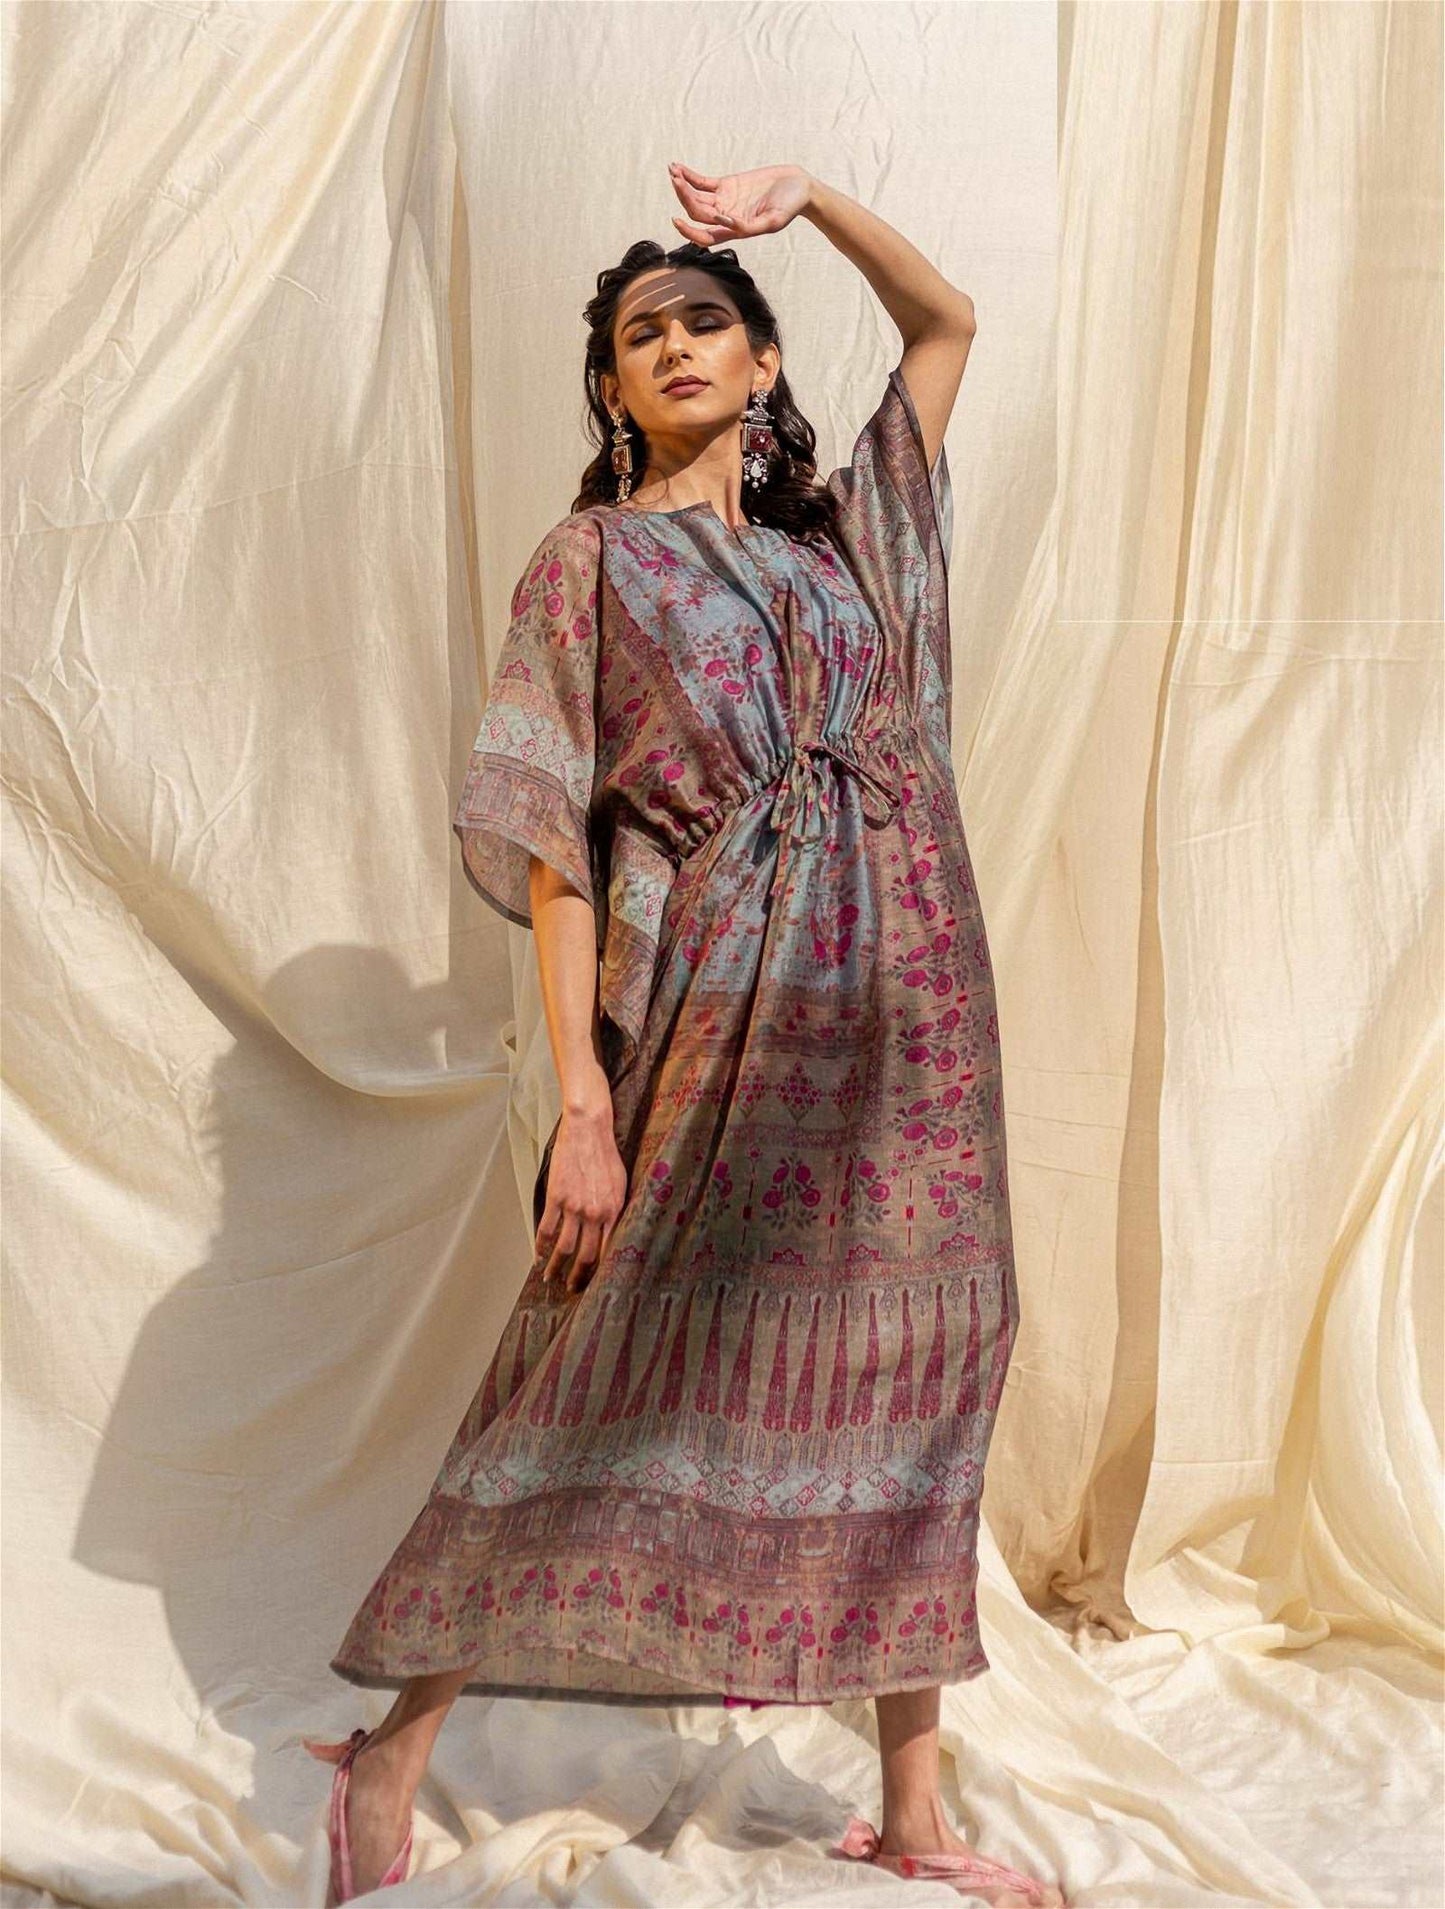 The model in the image is wearing Grey Silk Premium Kaftan from Alice Milan. Crafted with the finest materials and impeccable attention to detail, the Kaftan / Dress looks premium, trendy, luxurious and offers unparalleled comfort. It’s a perfect clothing option for loungewear, resort wear, party wear or for an airport look. The woman in the image looks happy, and confident with her style statement putting a happy smile on her face.